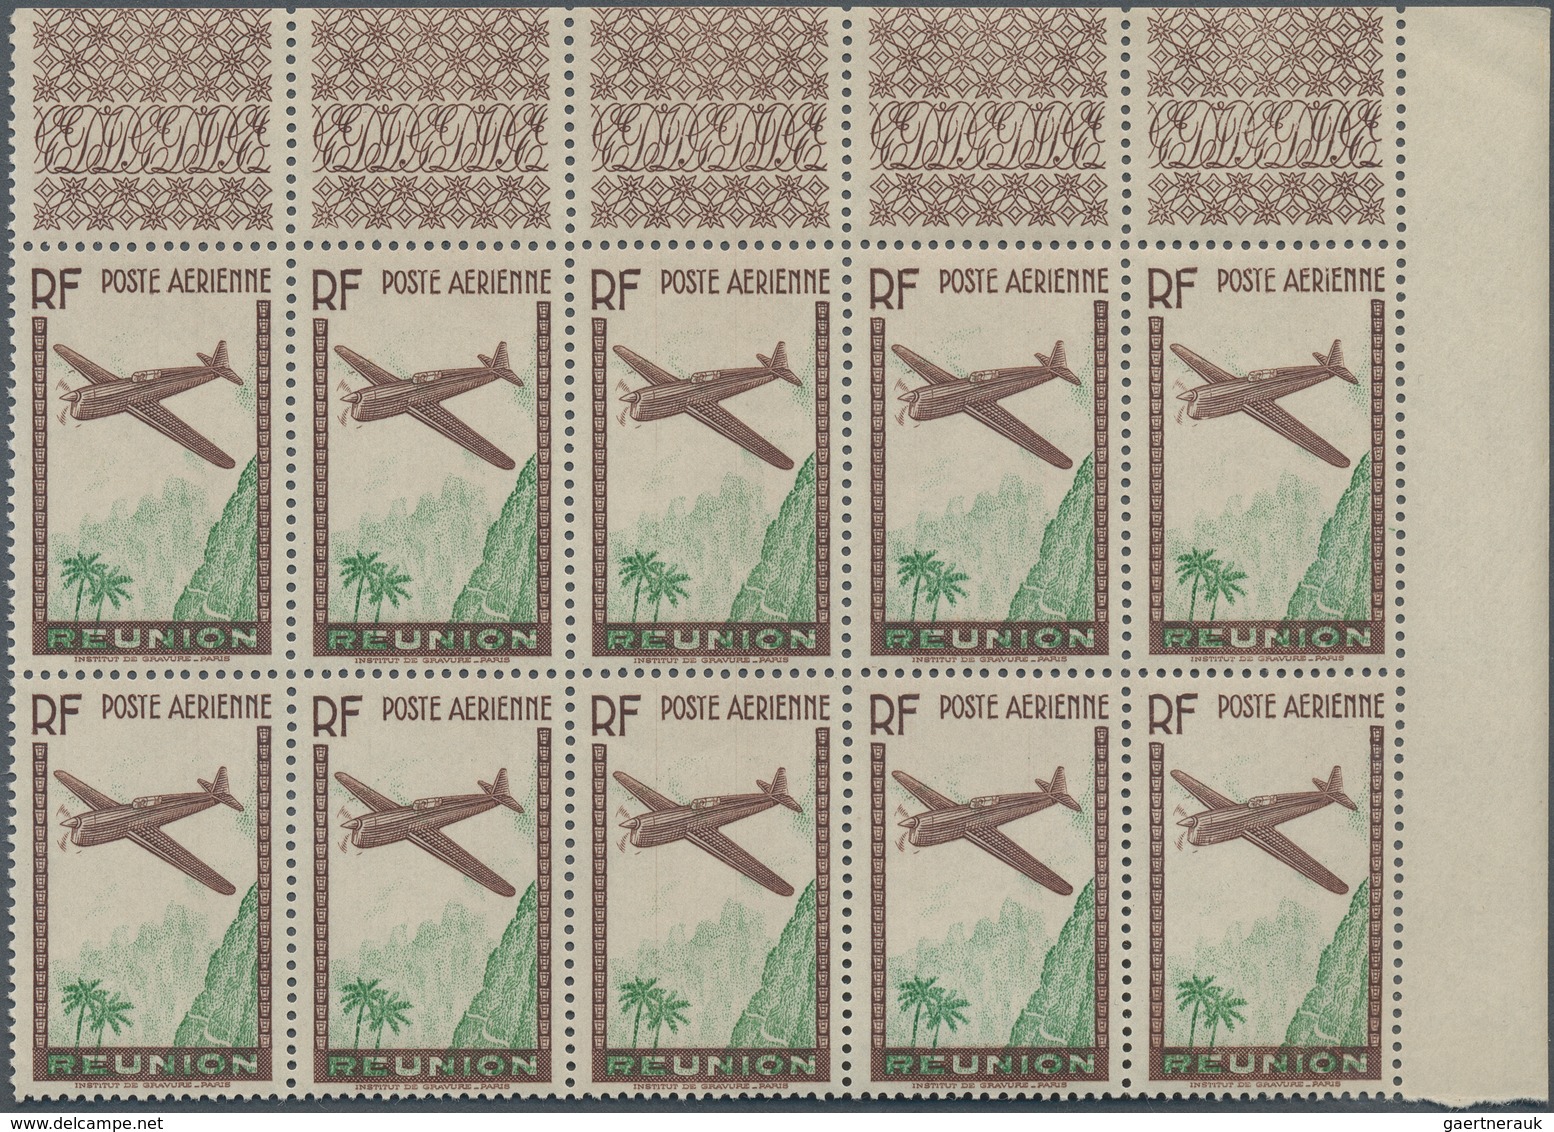 Reunion: 1938, Airmail Issue 'airplane Over Mountains' (12.65fr.) Brown/green With MISSING DENOMINAT - Gebraucht